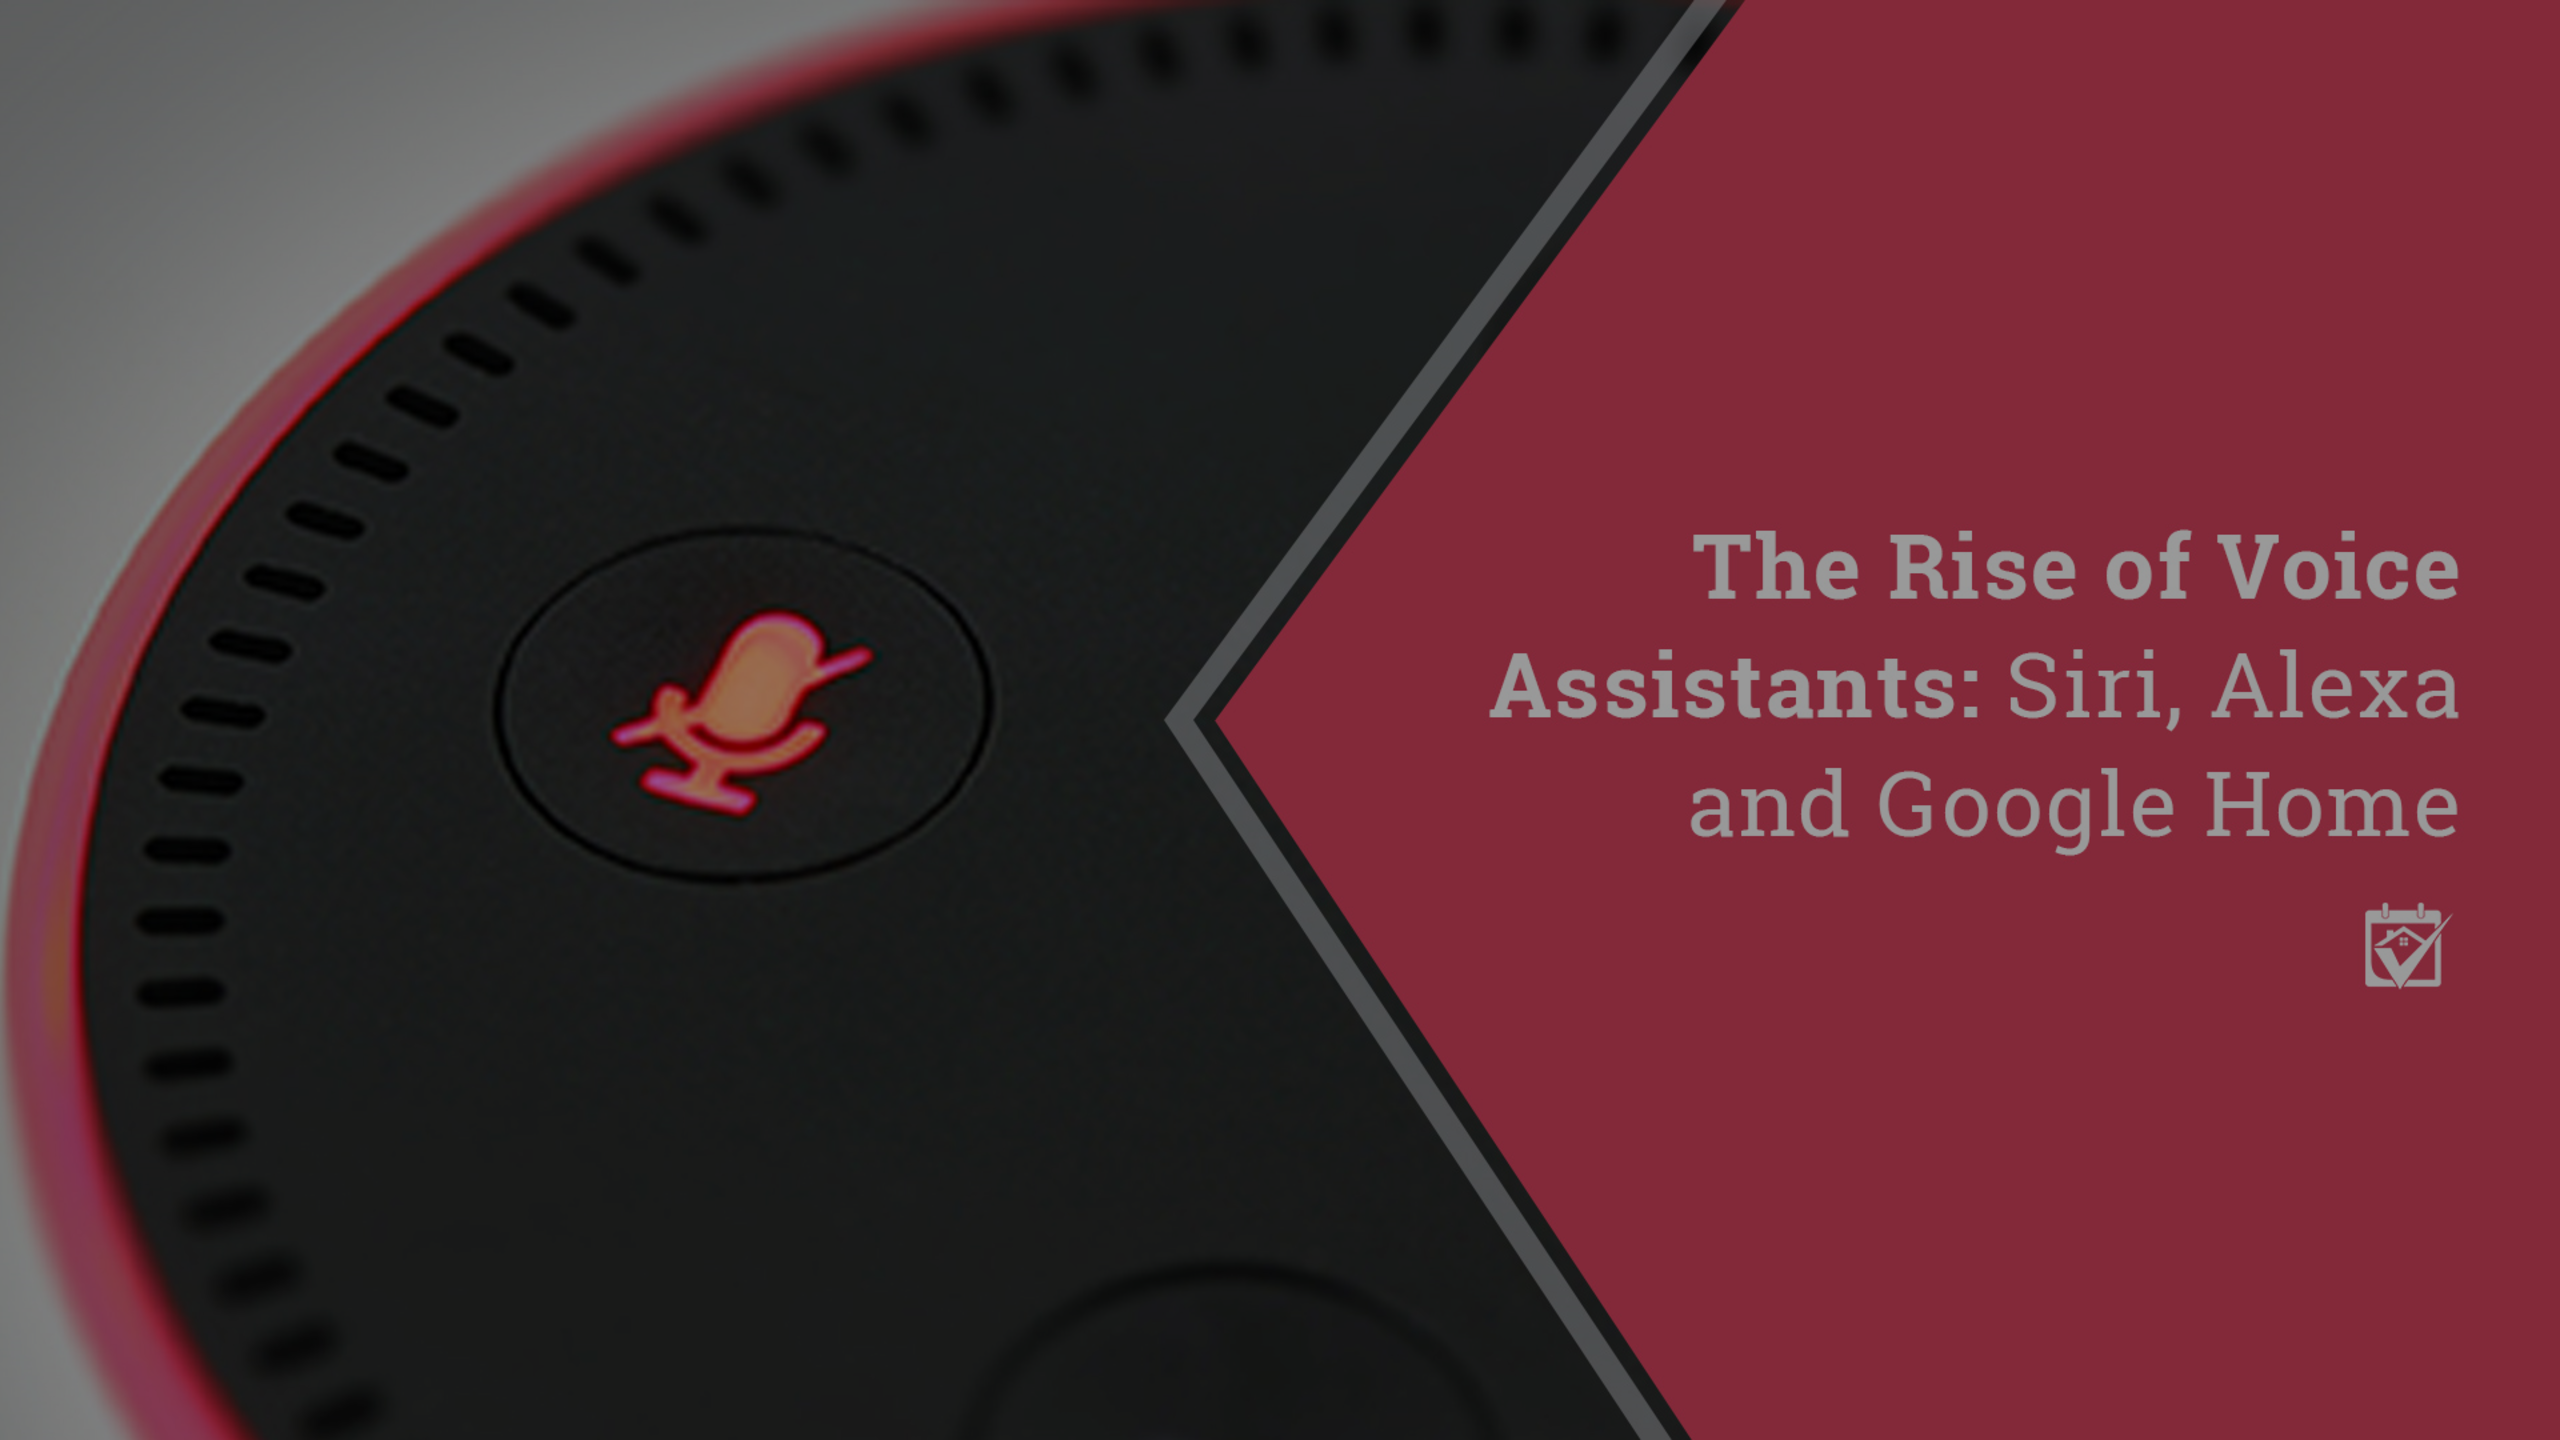 The Rise of Voice Assistants: Siri, Alexa and Google Assistant